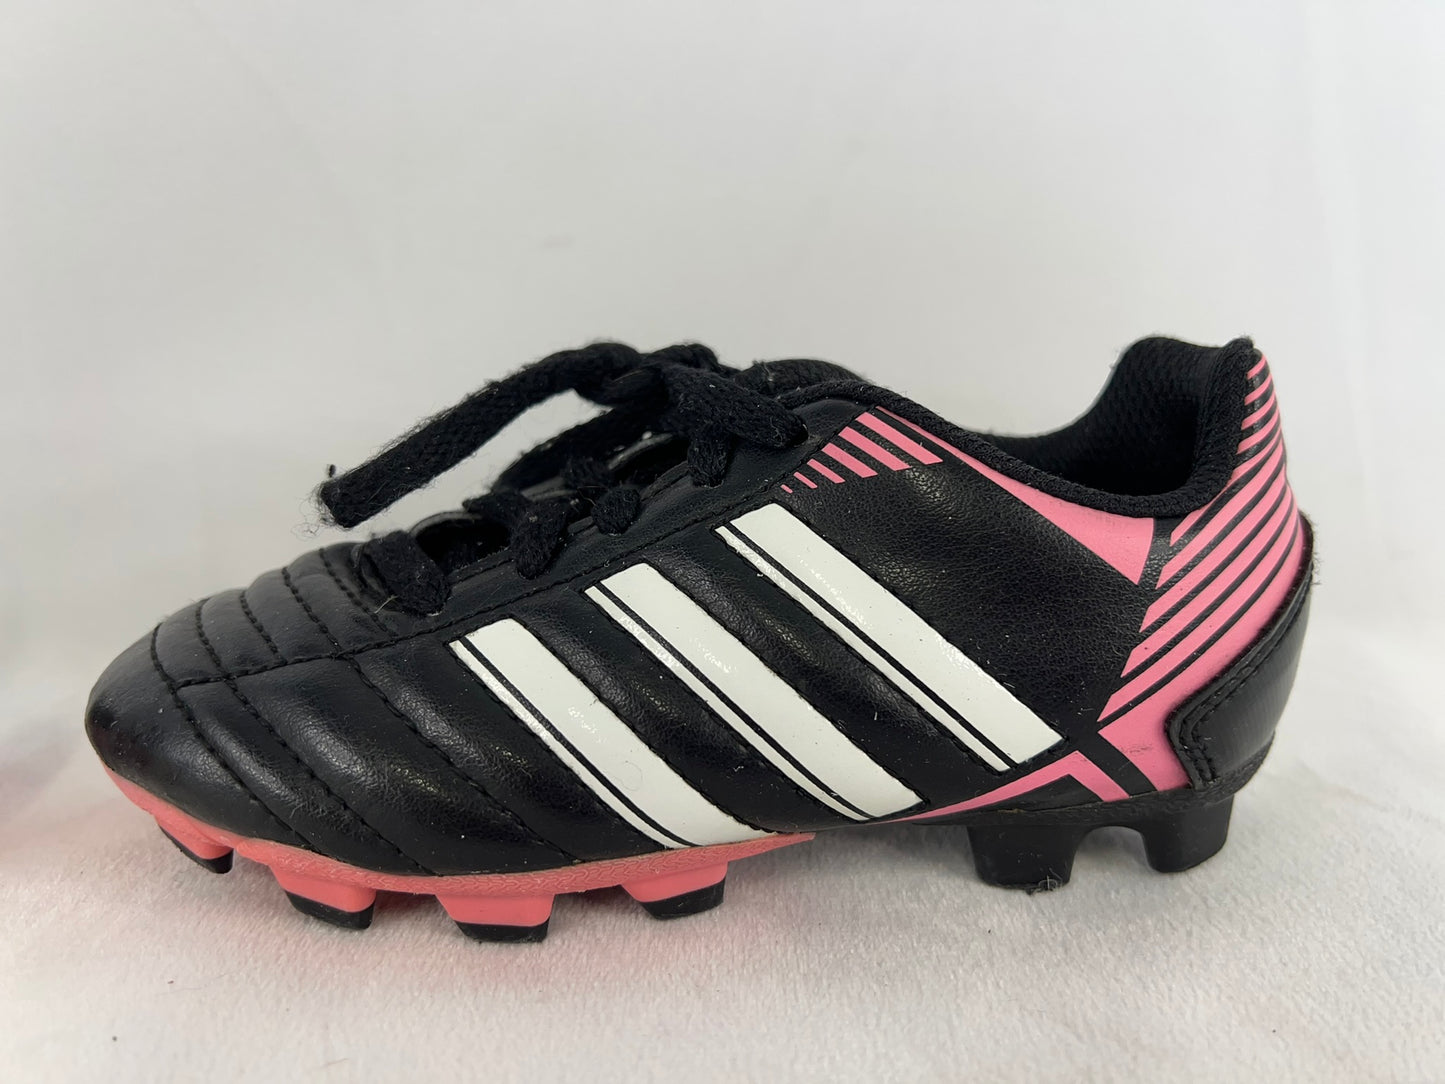 Soccer Shoes Cleats Child Size 11 Adidas Black White Pink Excellent